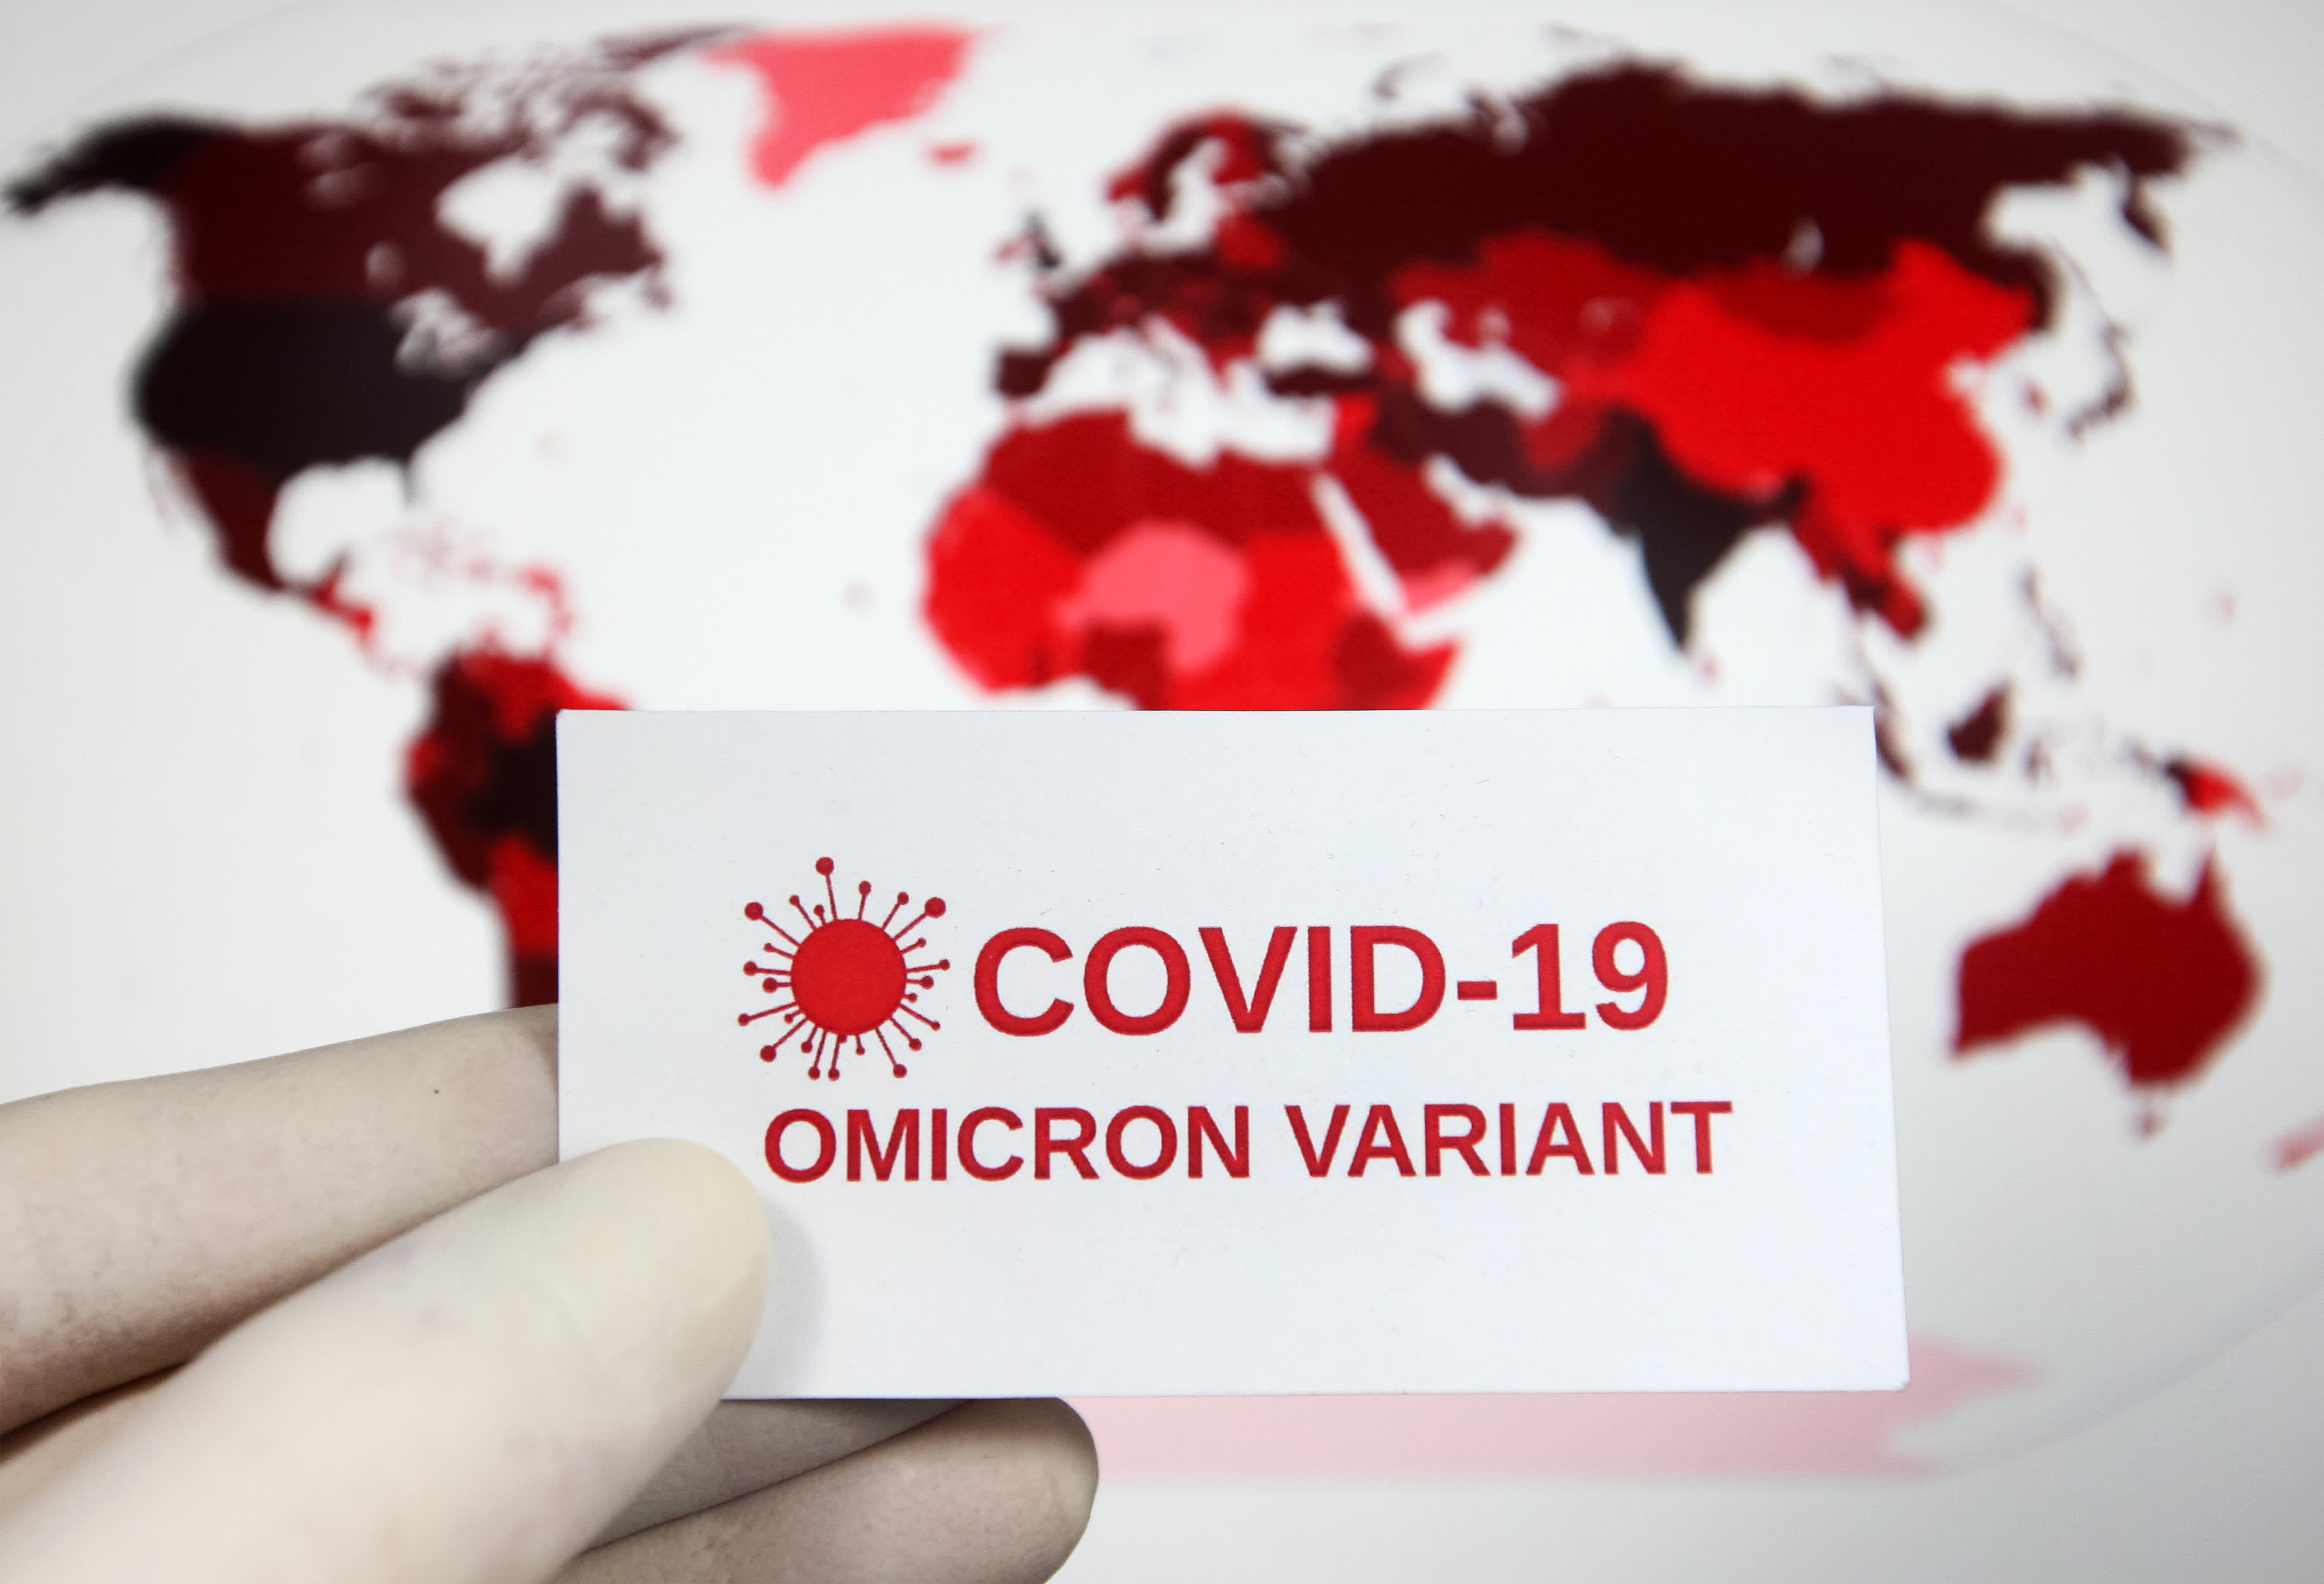 Omicron Covid variant poses greater risk for the unvaccinated, former White House advisor says